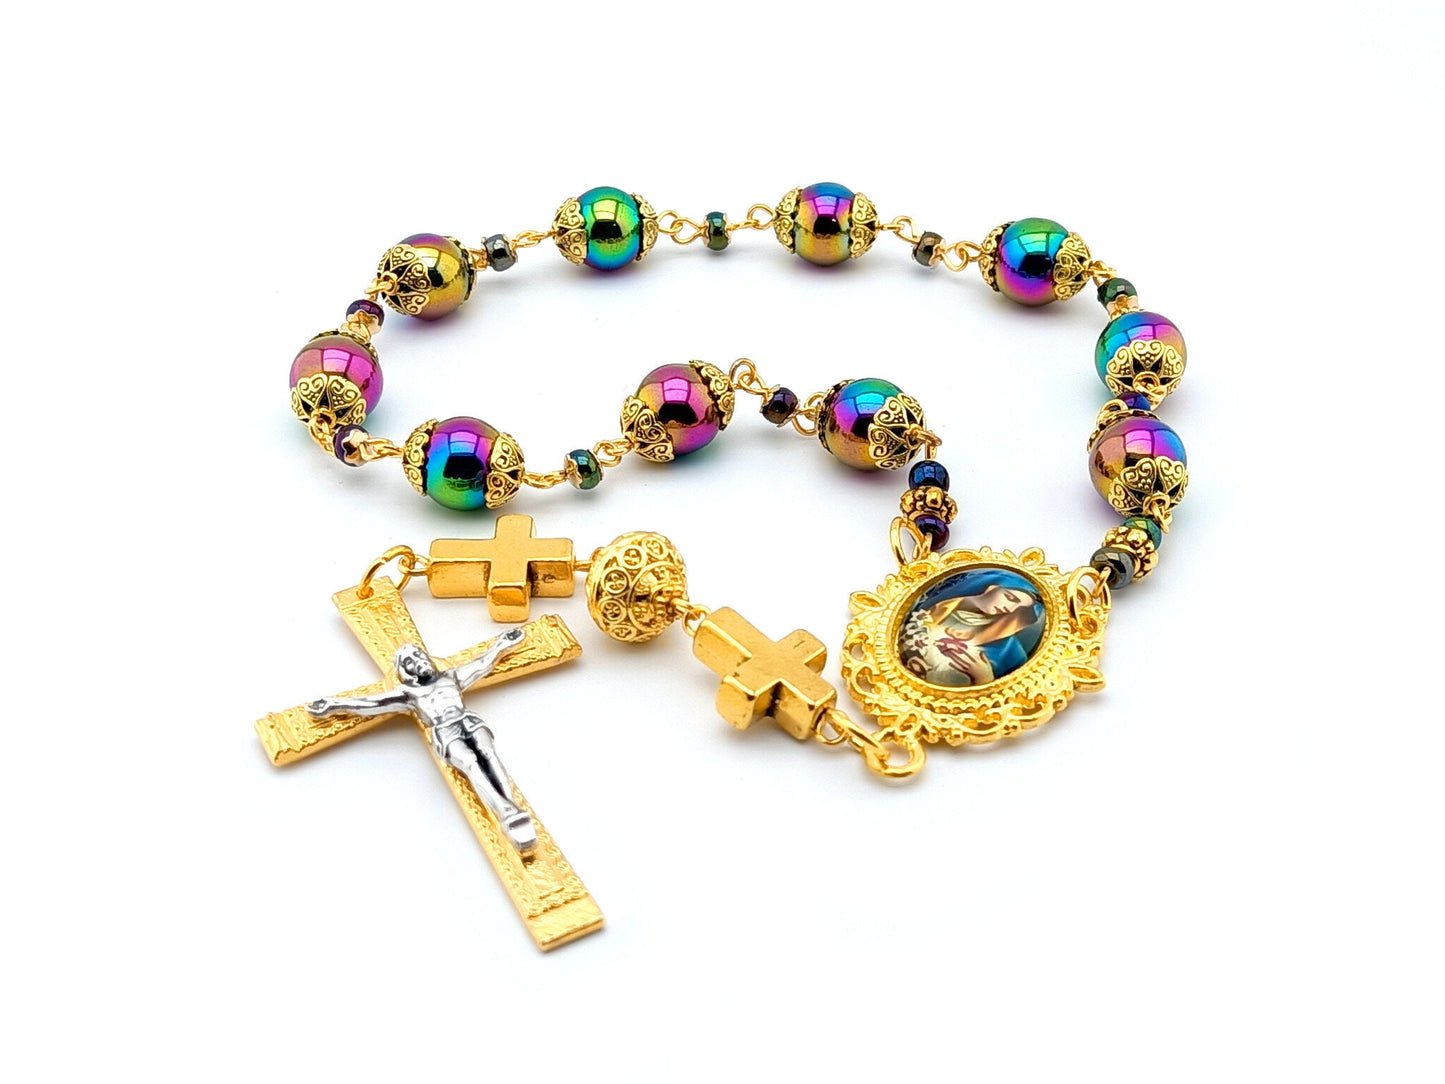 Our Lady of Sorrows unique rosary beads single decade rosary with multi coloured hemitite beads , golden bead caps, picture centre medal and crucifix.